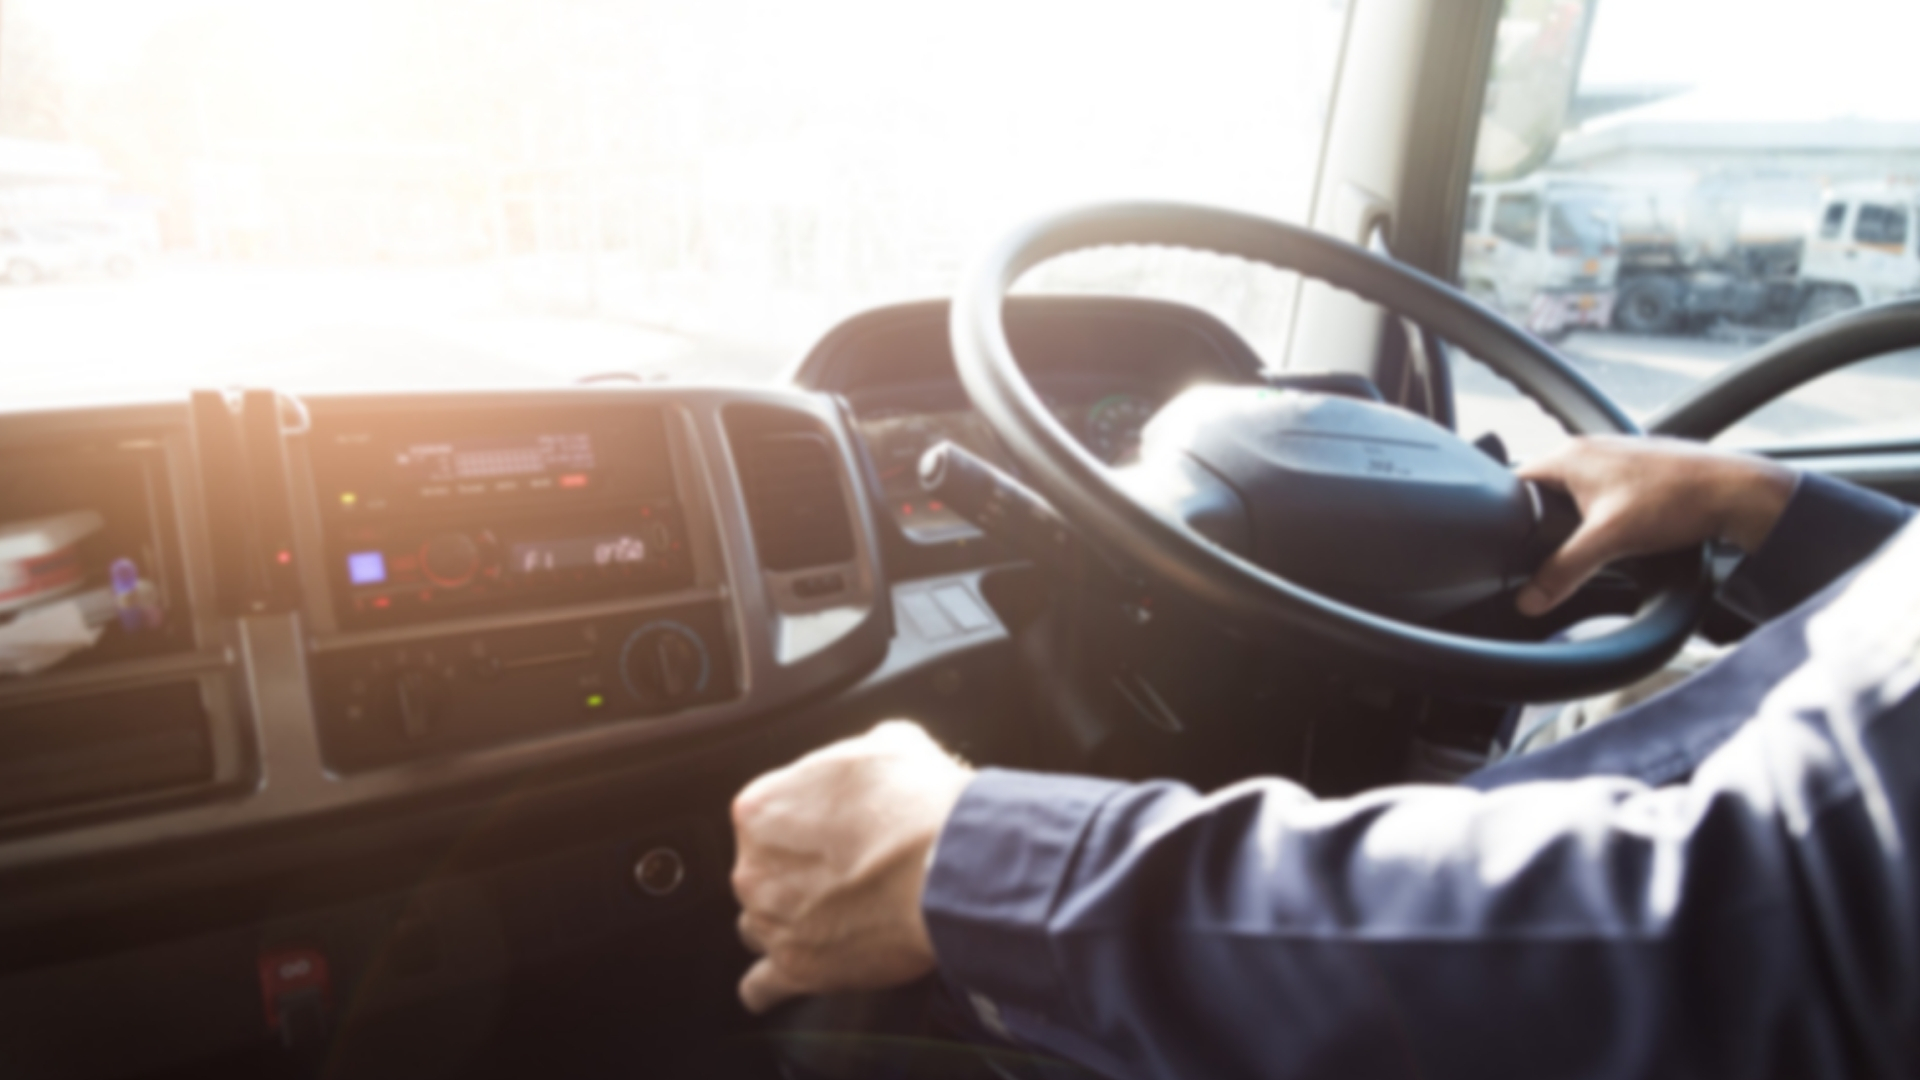 Are you ready for the Smart Tachograph?